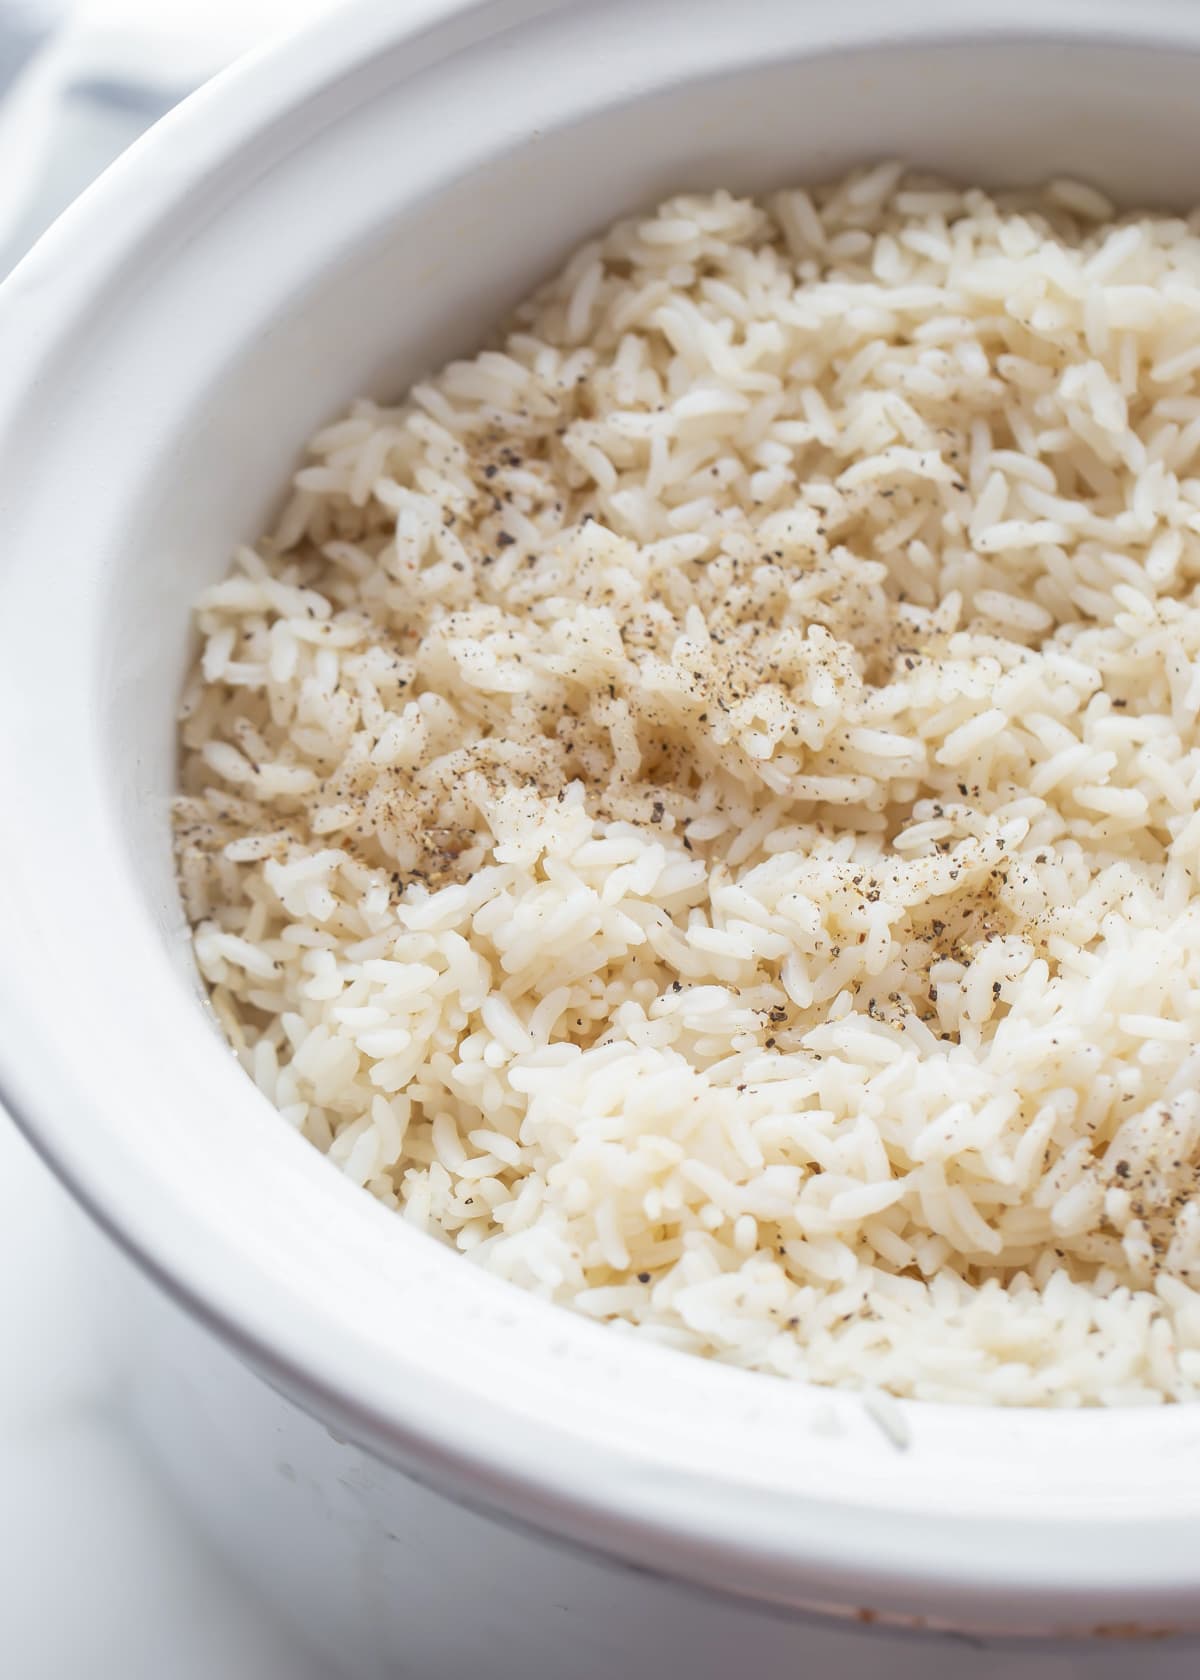 Cooking rice in a crock pot.